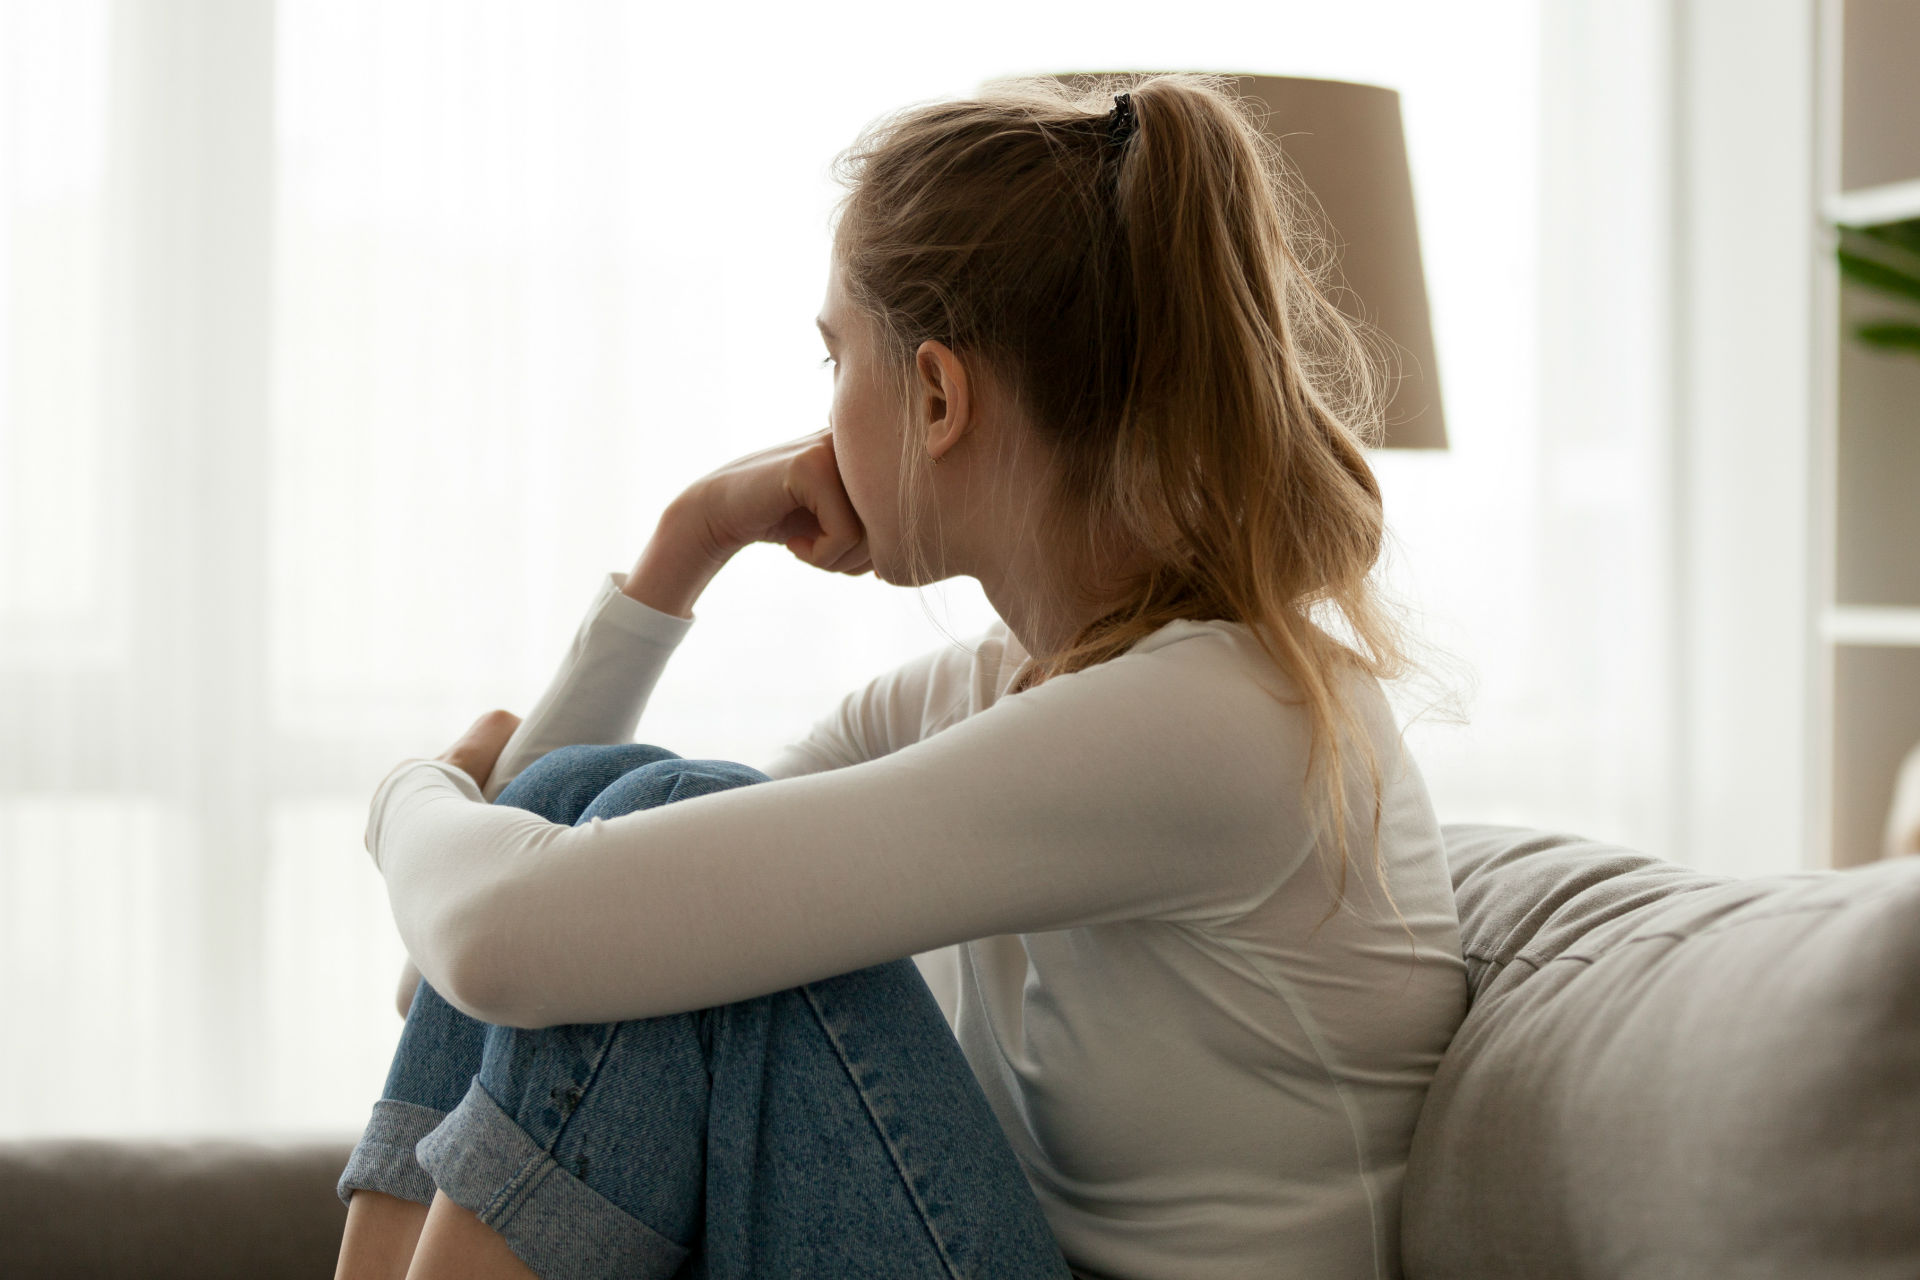 girl on couch looking depressed